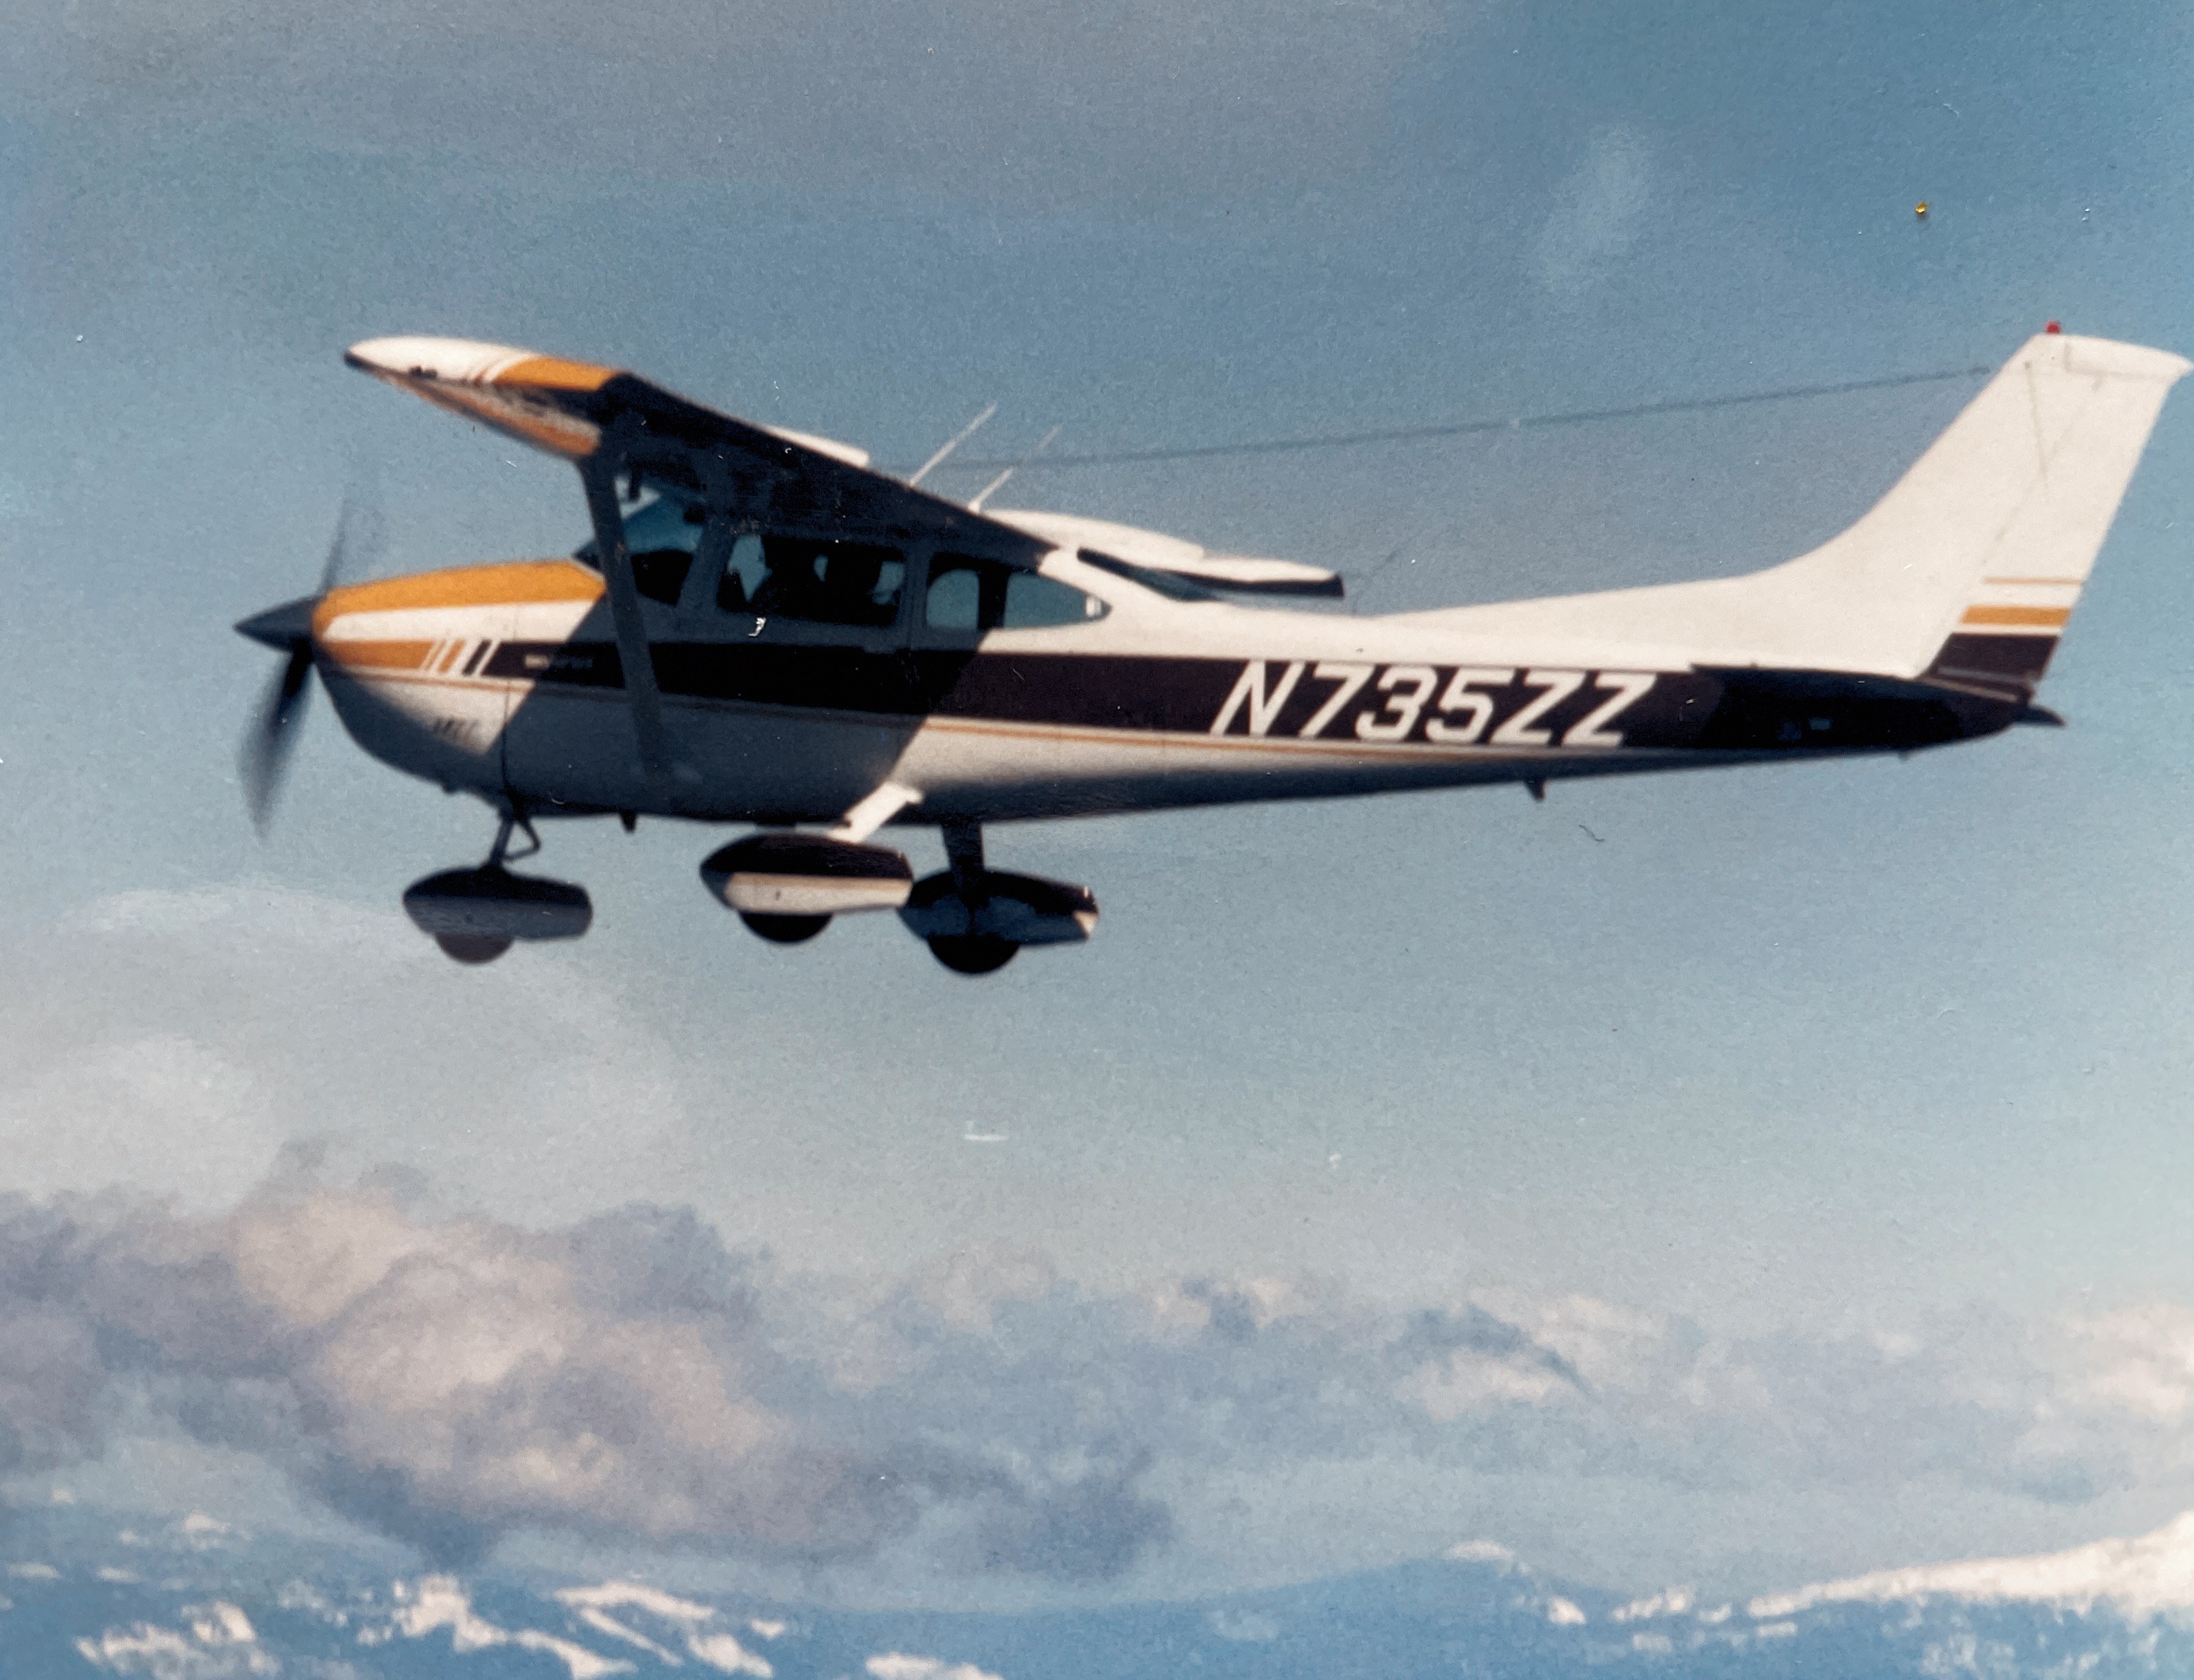 On our way home with our new Cessna 182 March 1997